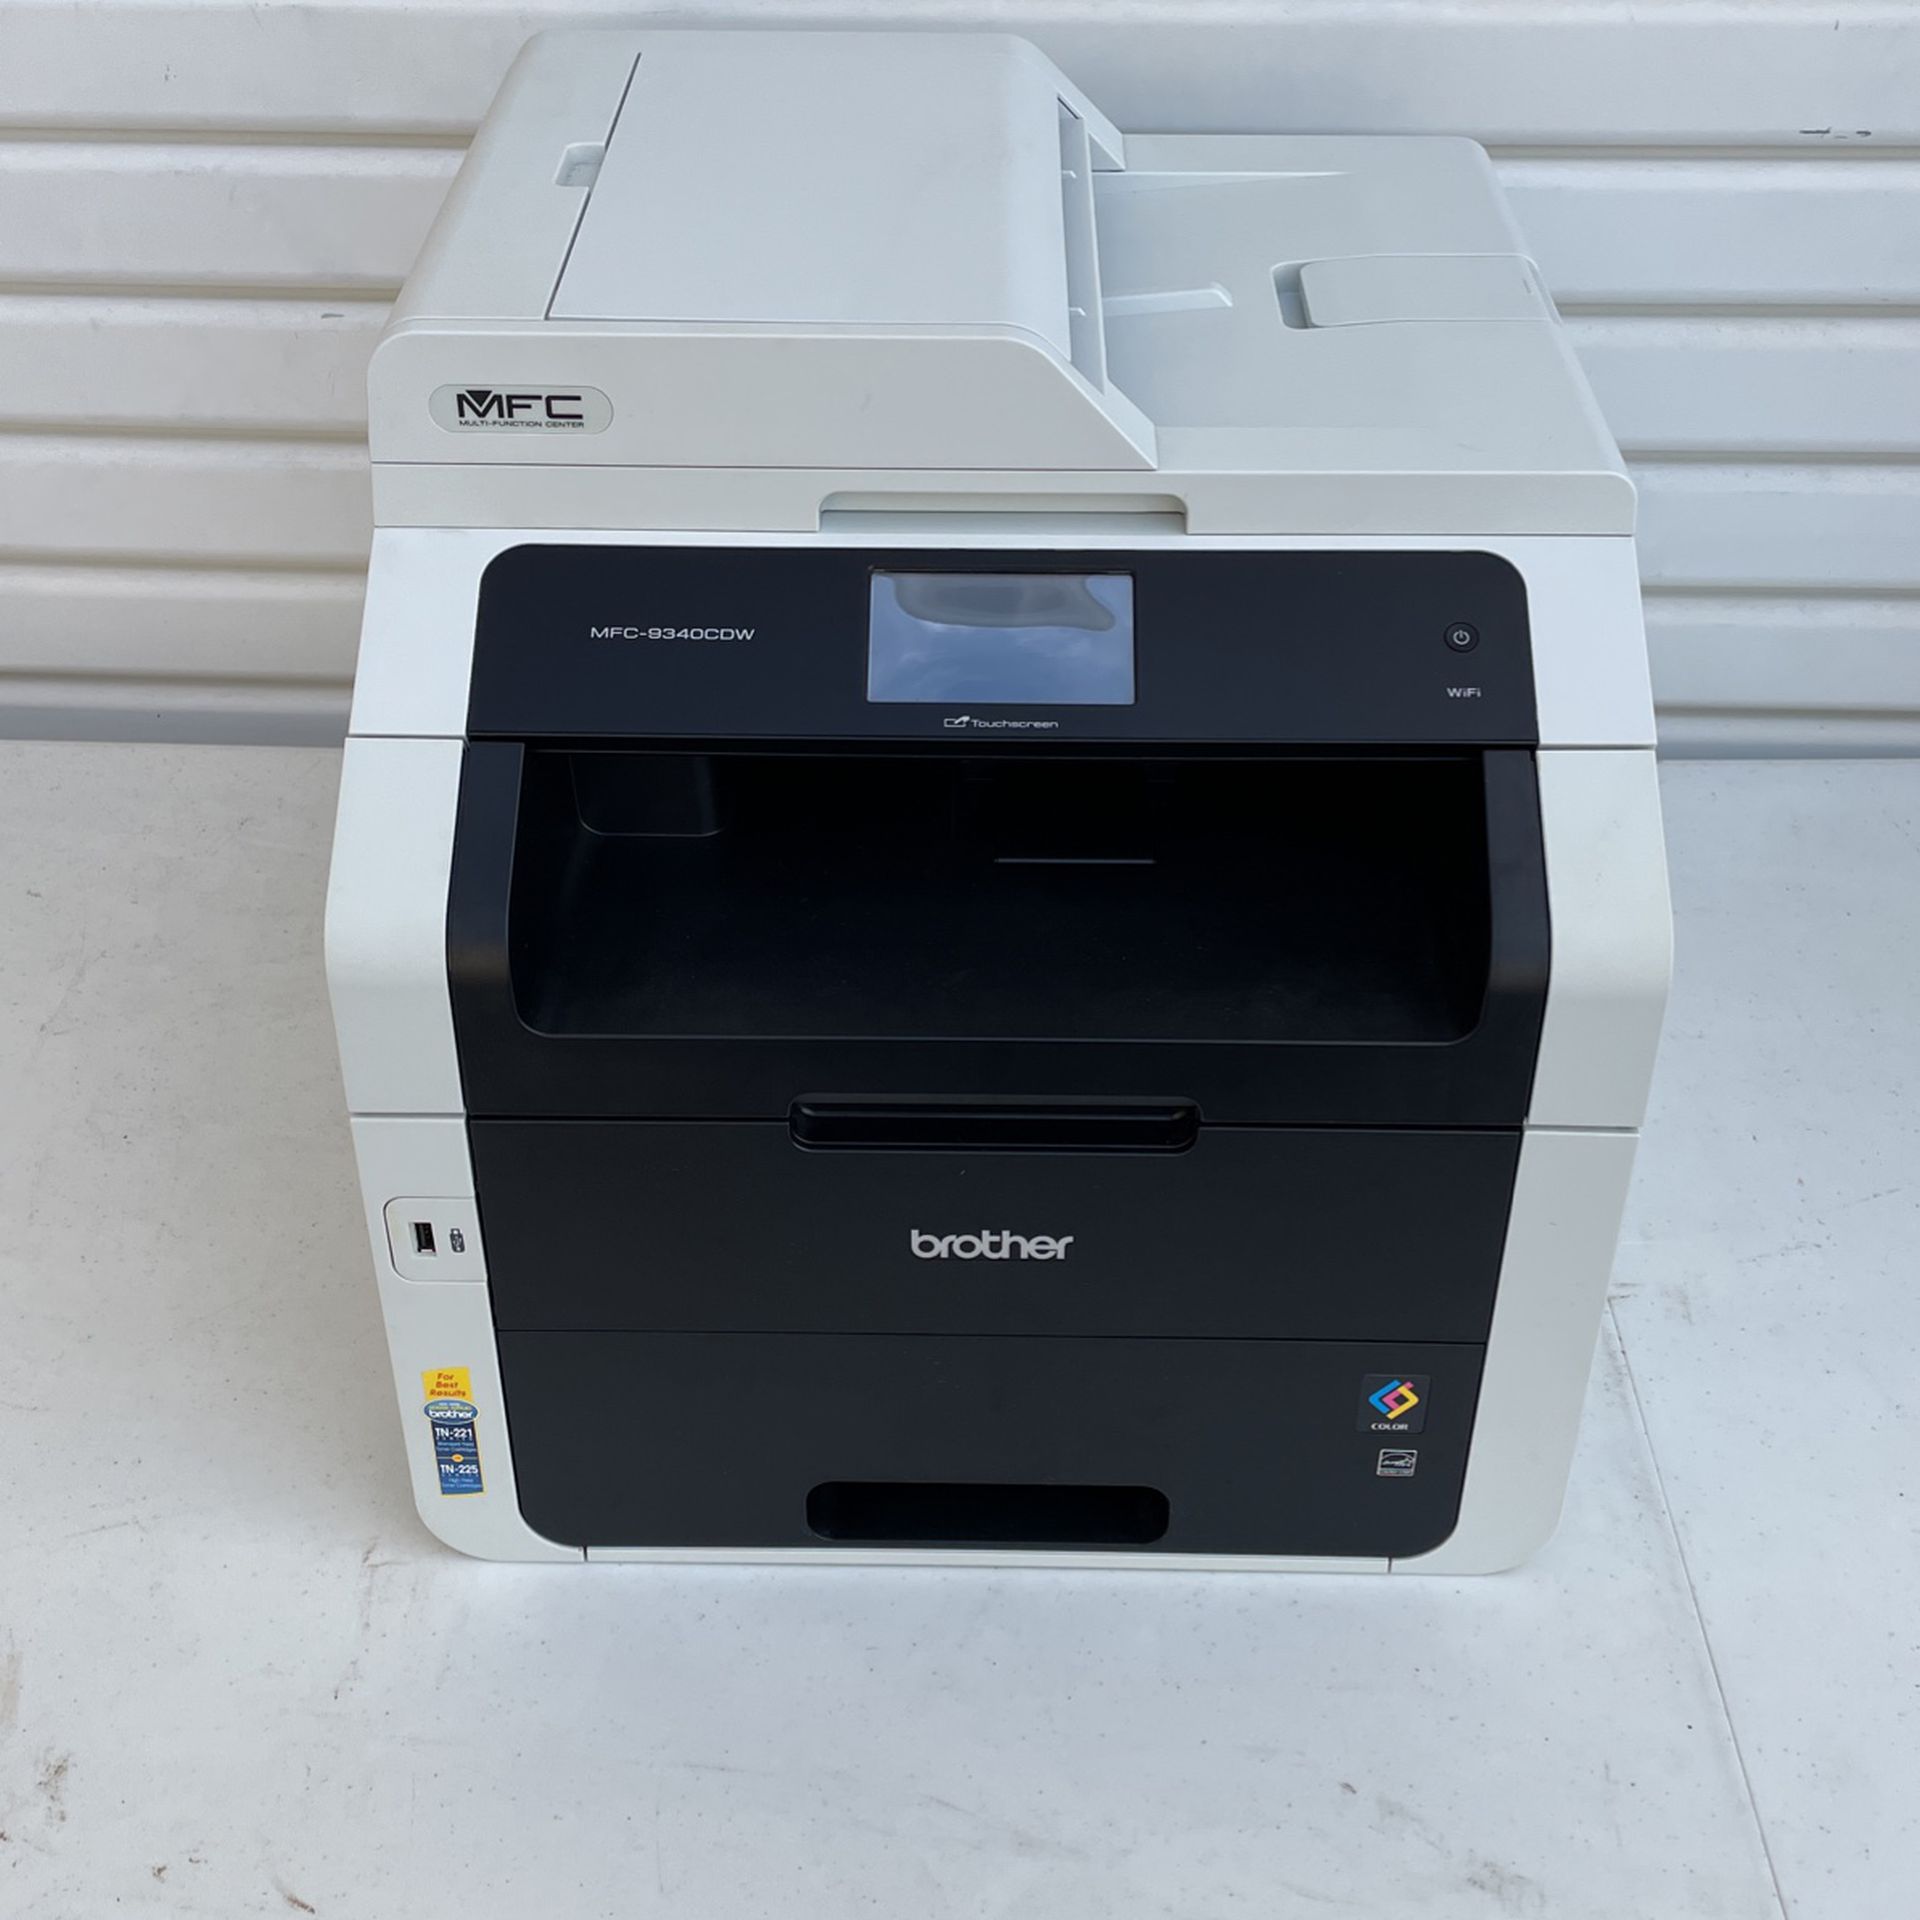 Brother Color Copy Machine Printer Wifi Multi Function MFC-9340CDW